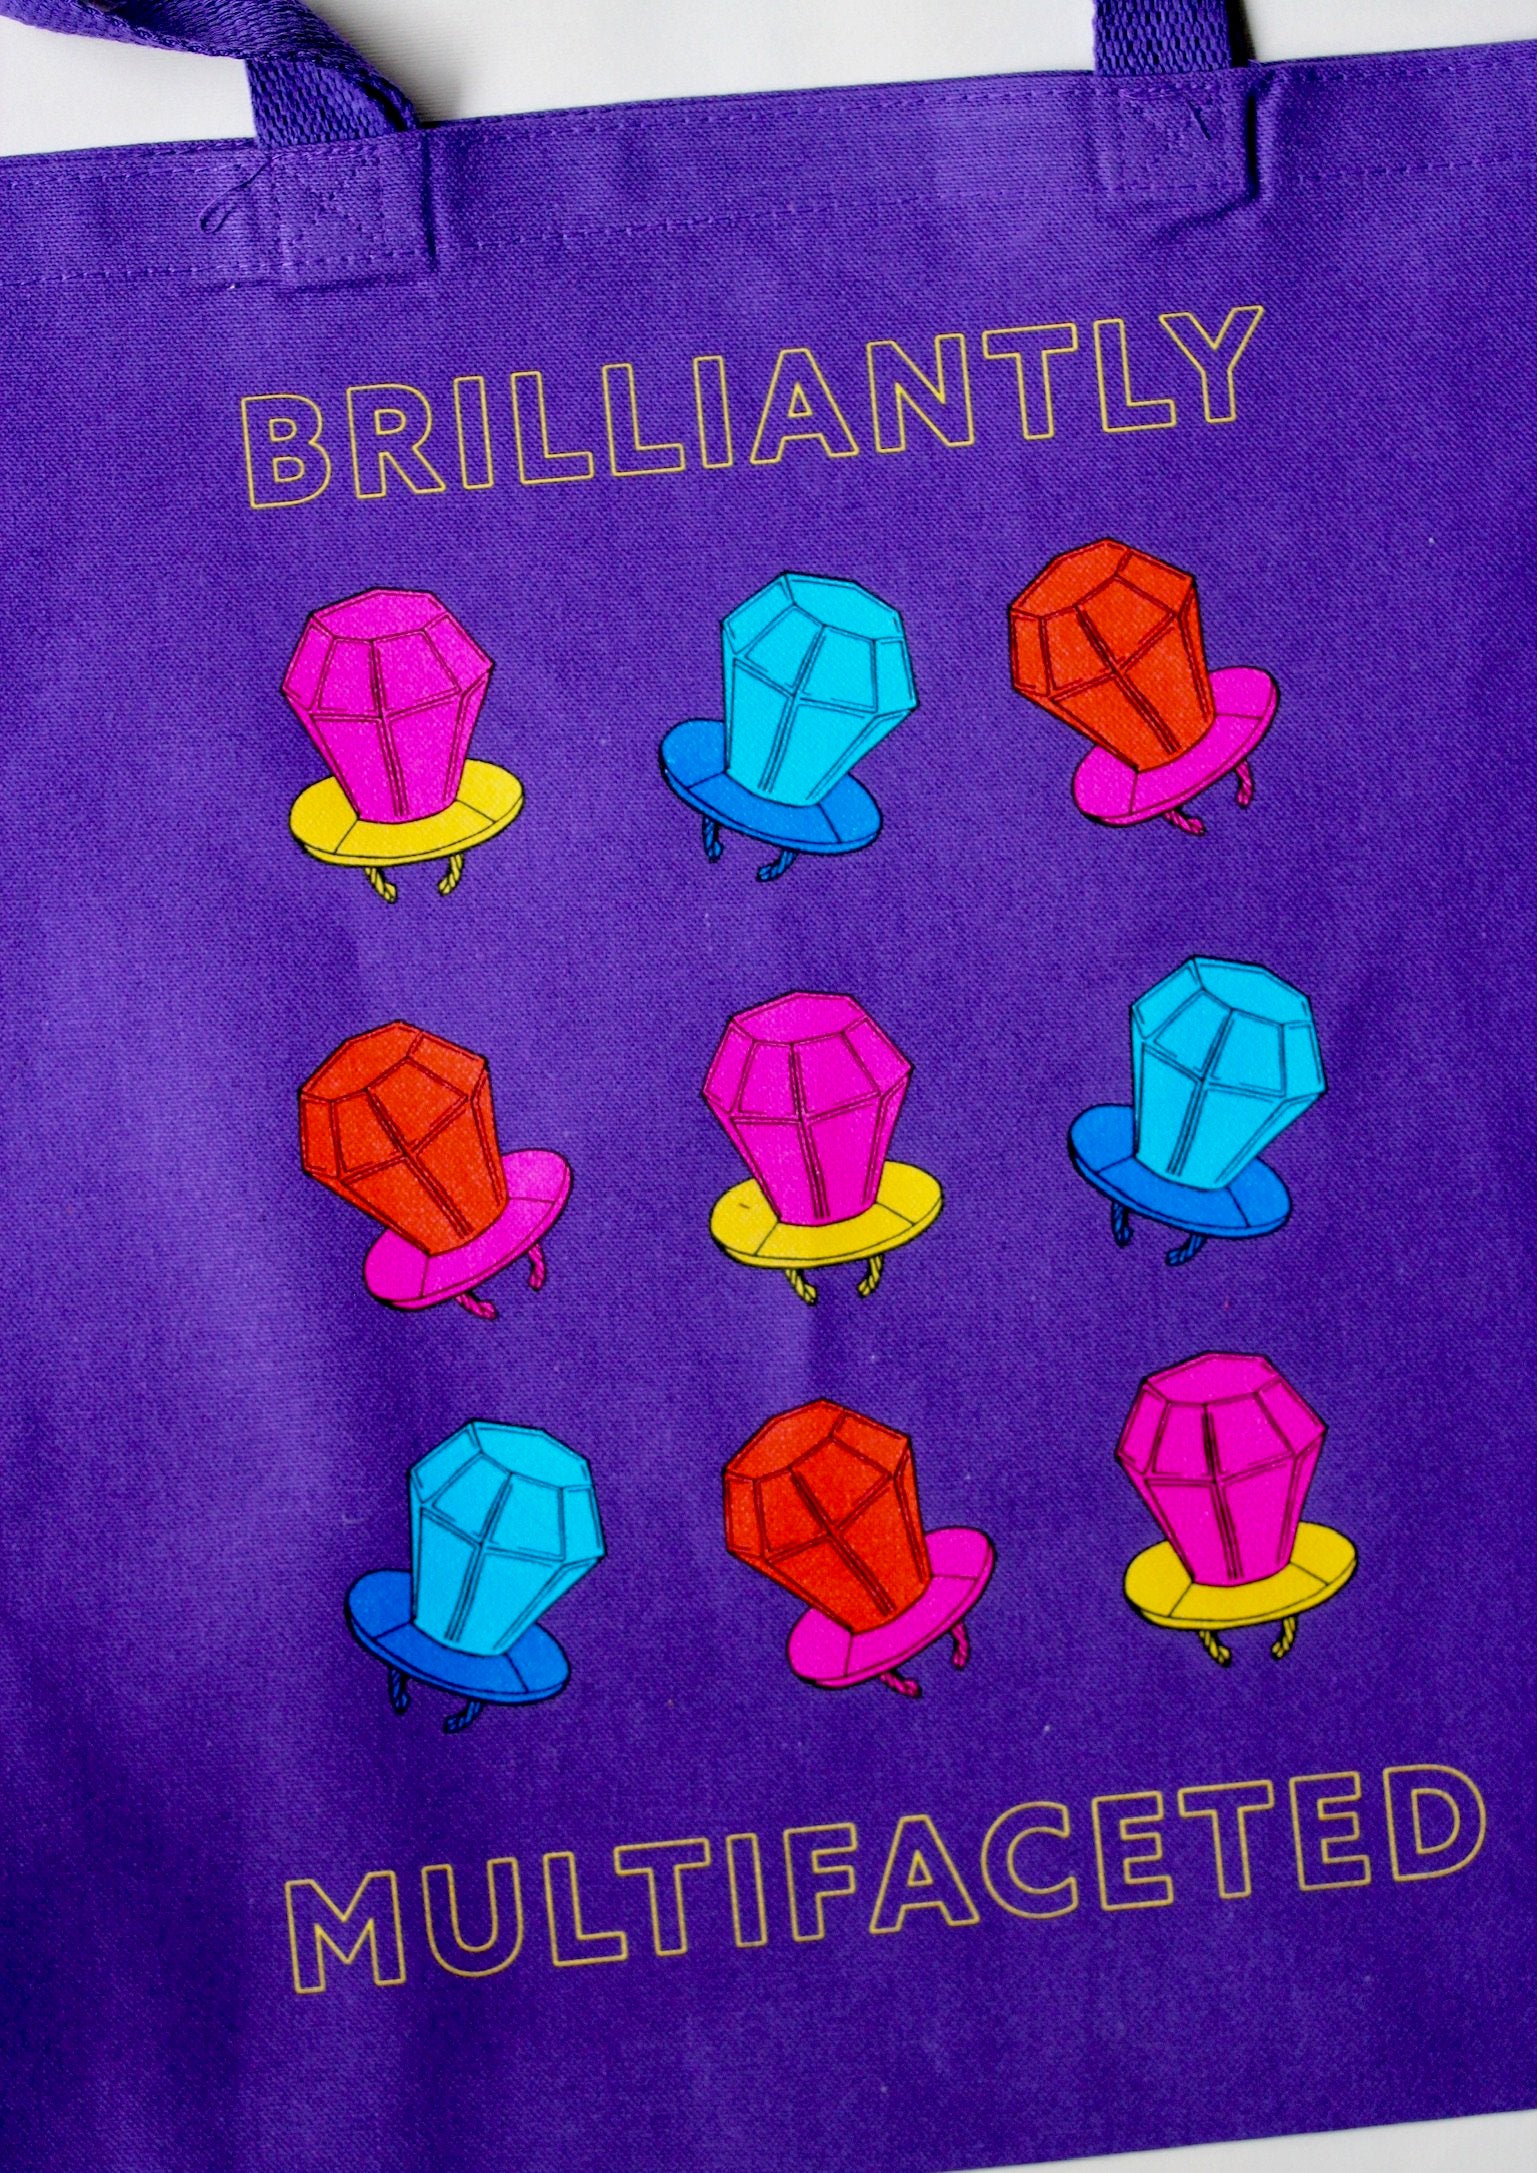 Purple tote bag with words "Brilliantly Multifaceted" and colored ring pop art